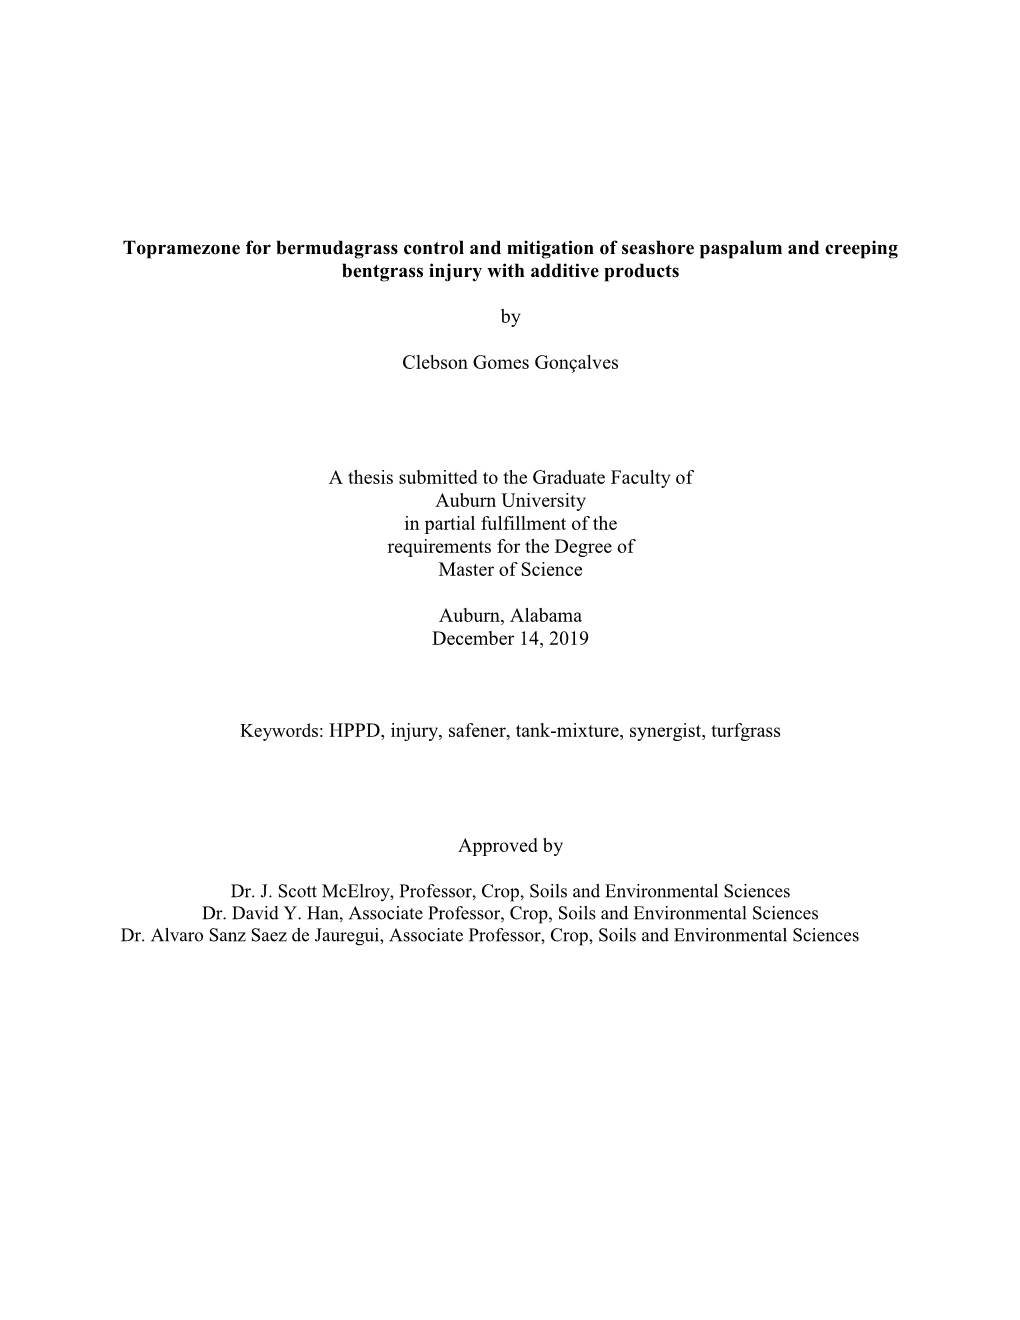 Thesis Clebson Gomes Goncalves.Pdf